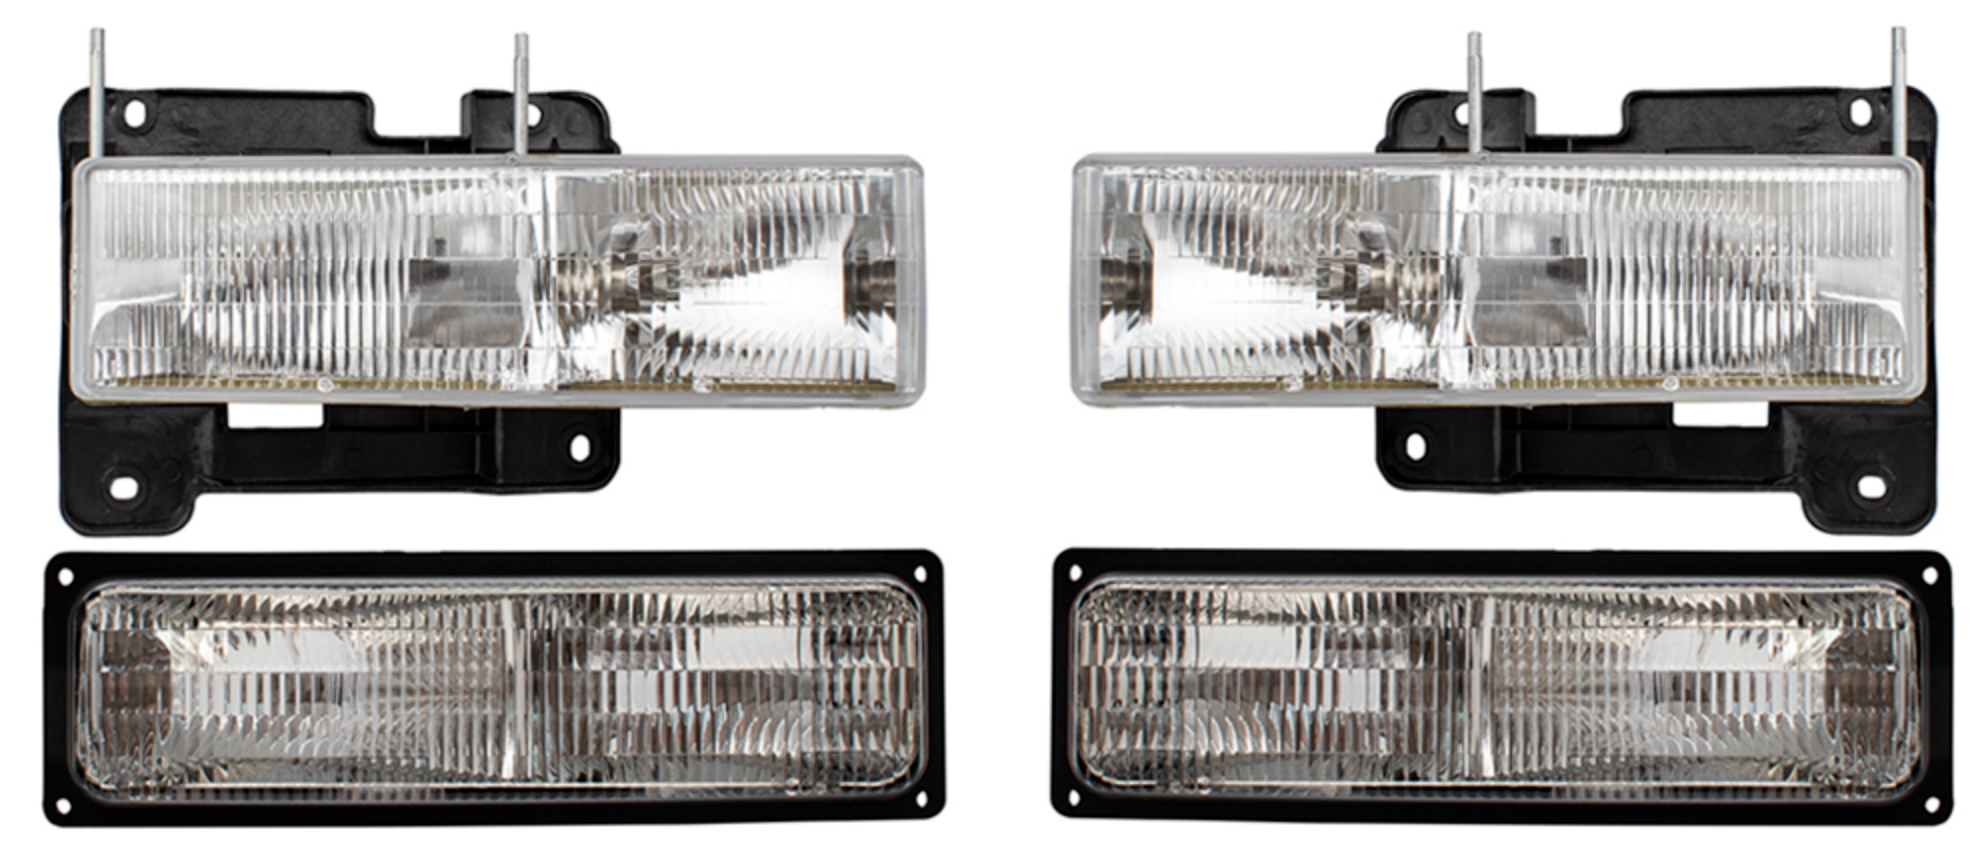 What are composite headlights